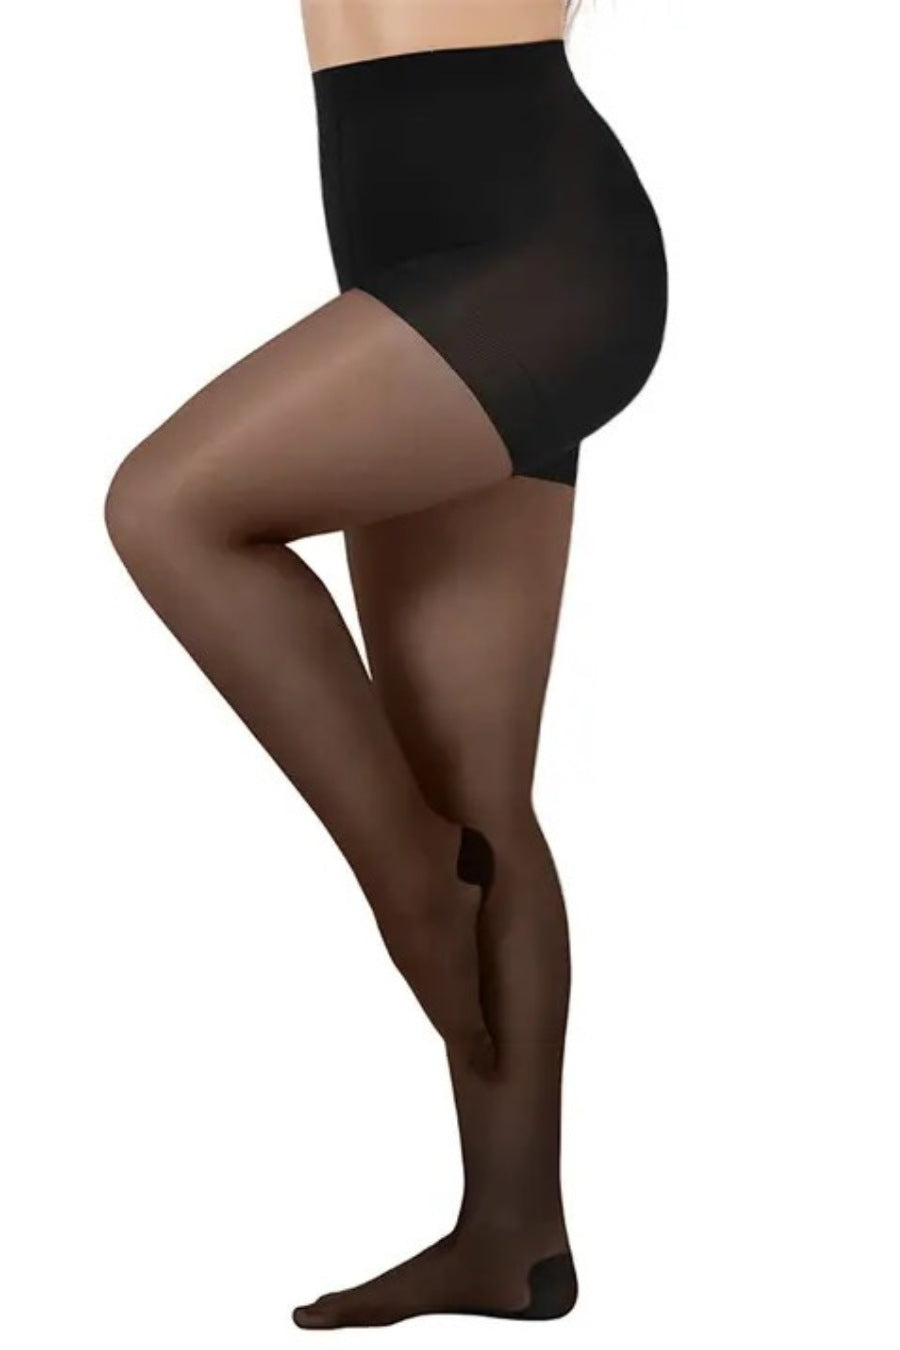 SAMPLE - Shaping Tights - S/M Contour Clothing